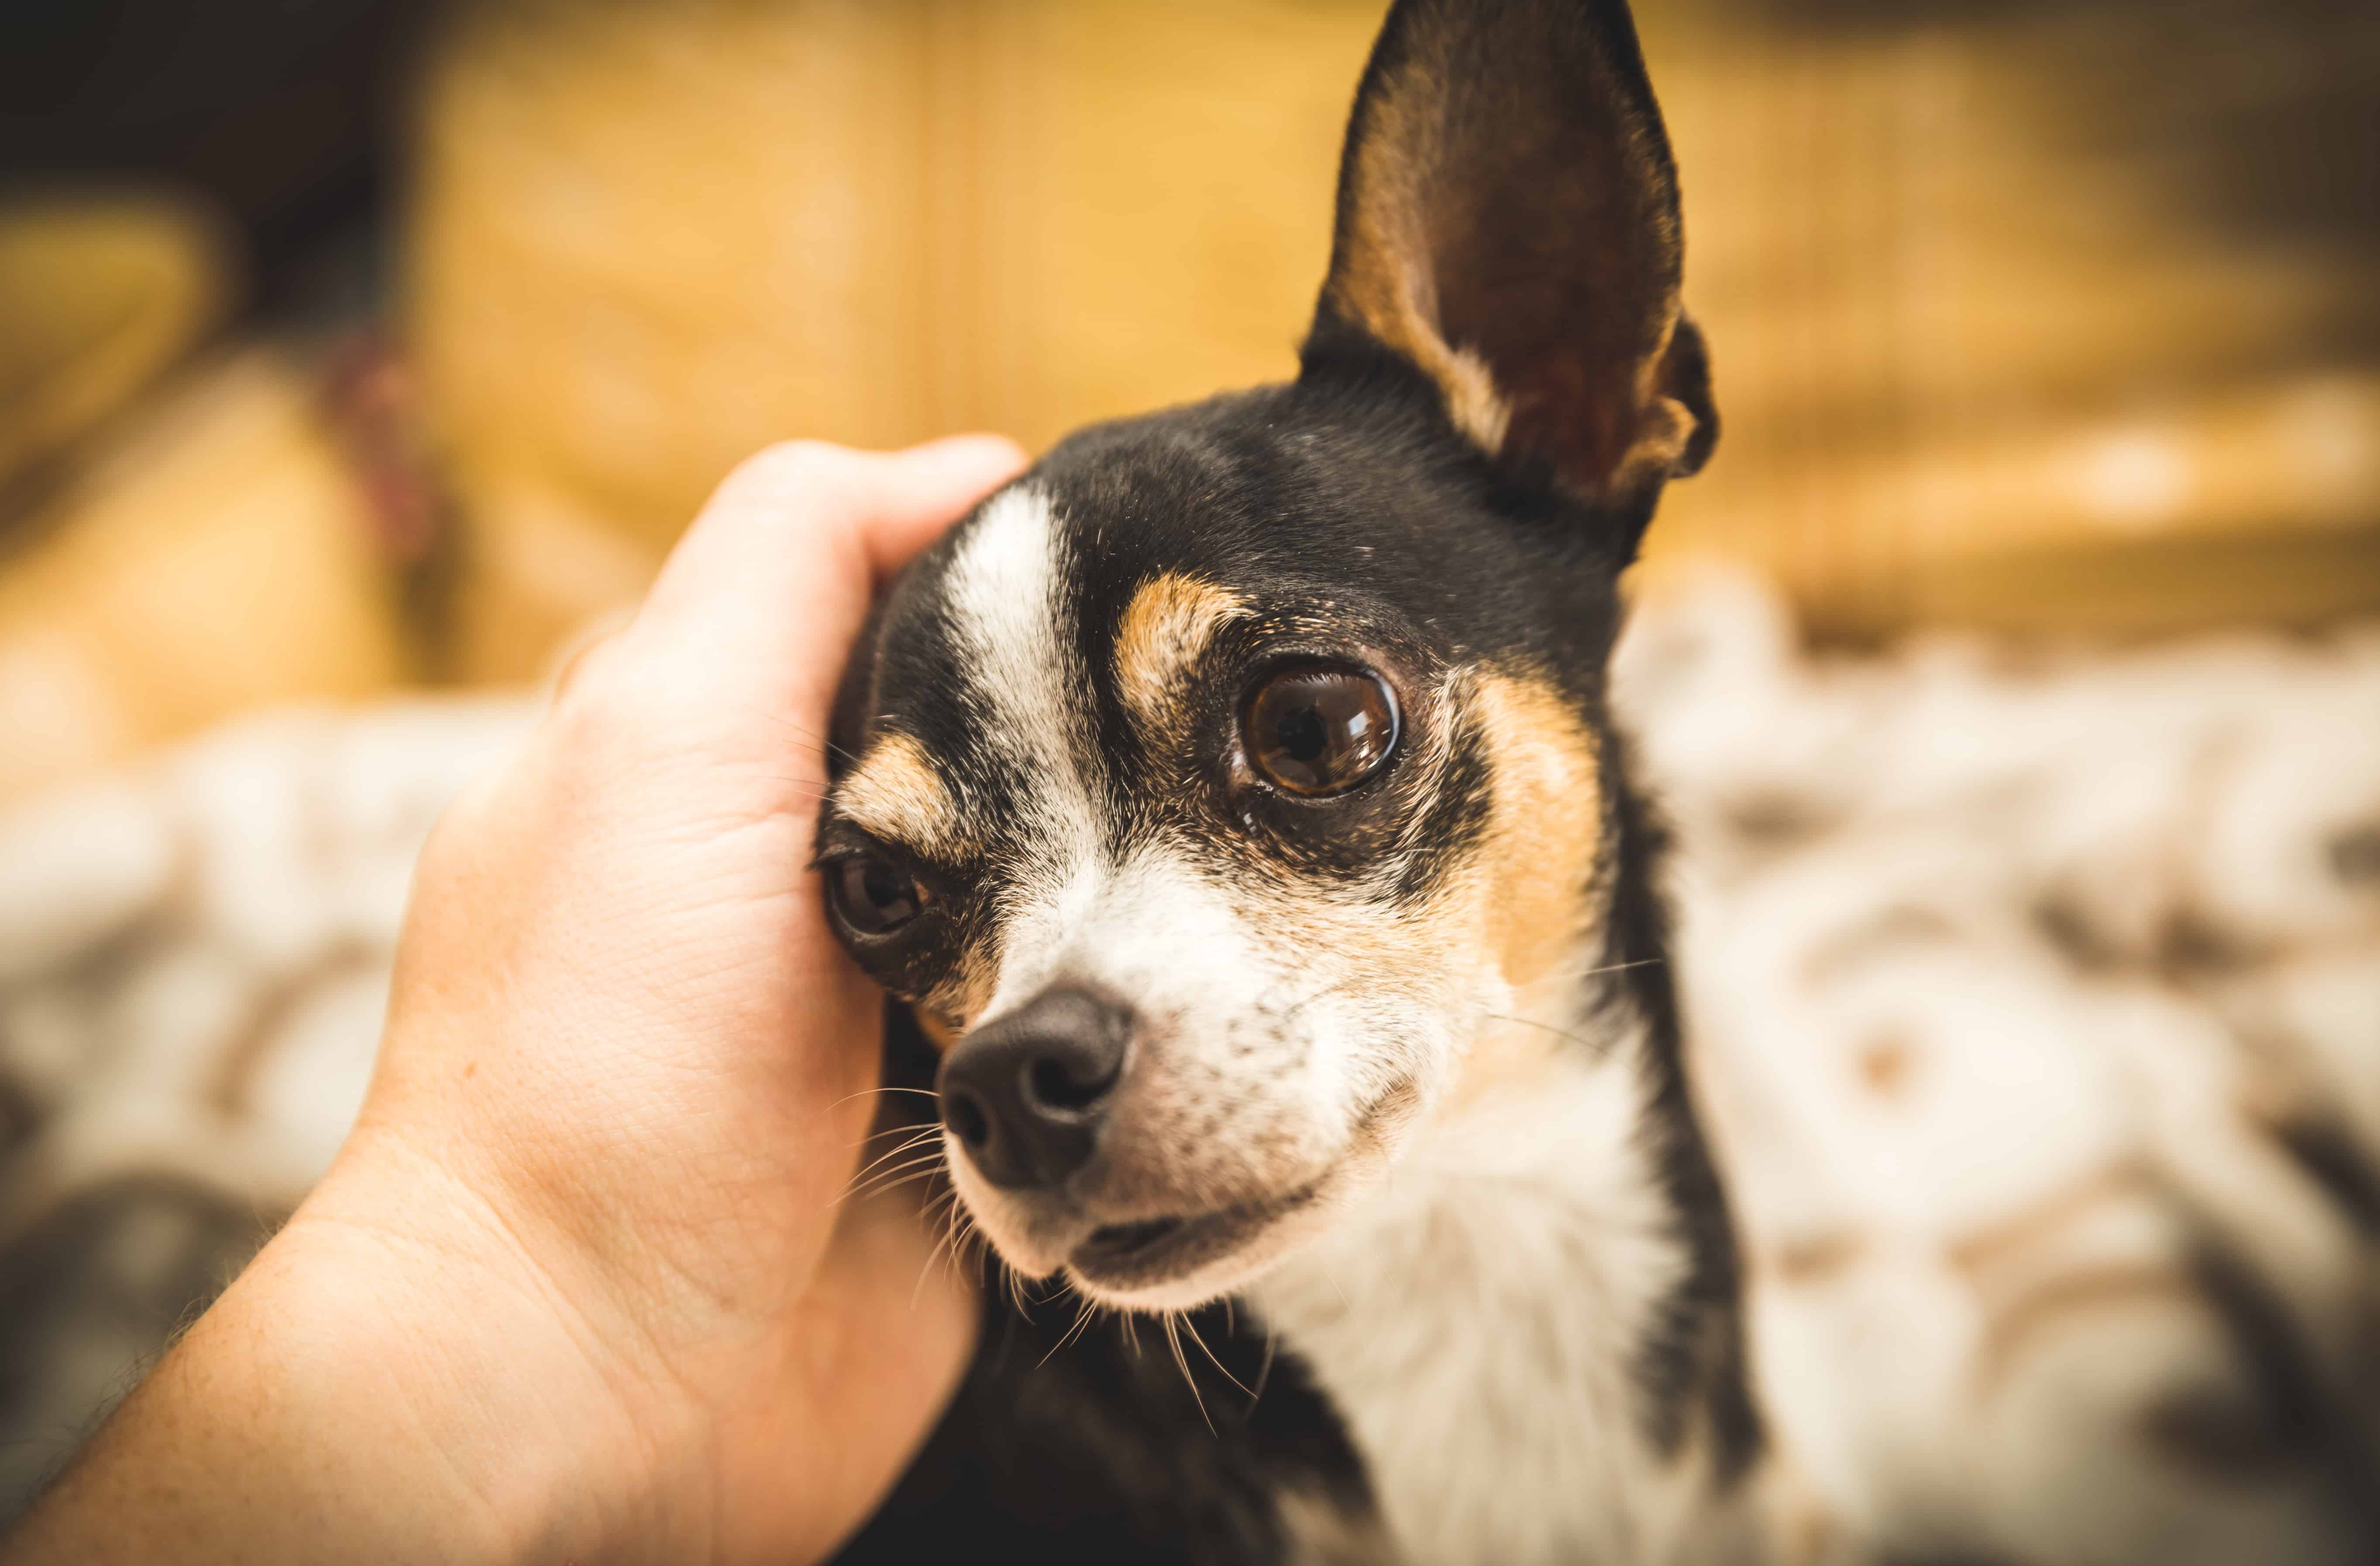 Male chihuahua looks lovingly as a person pets it.